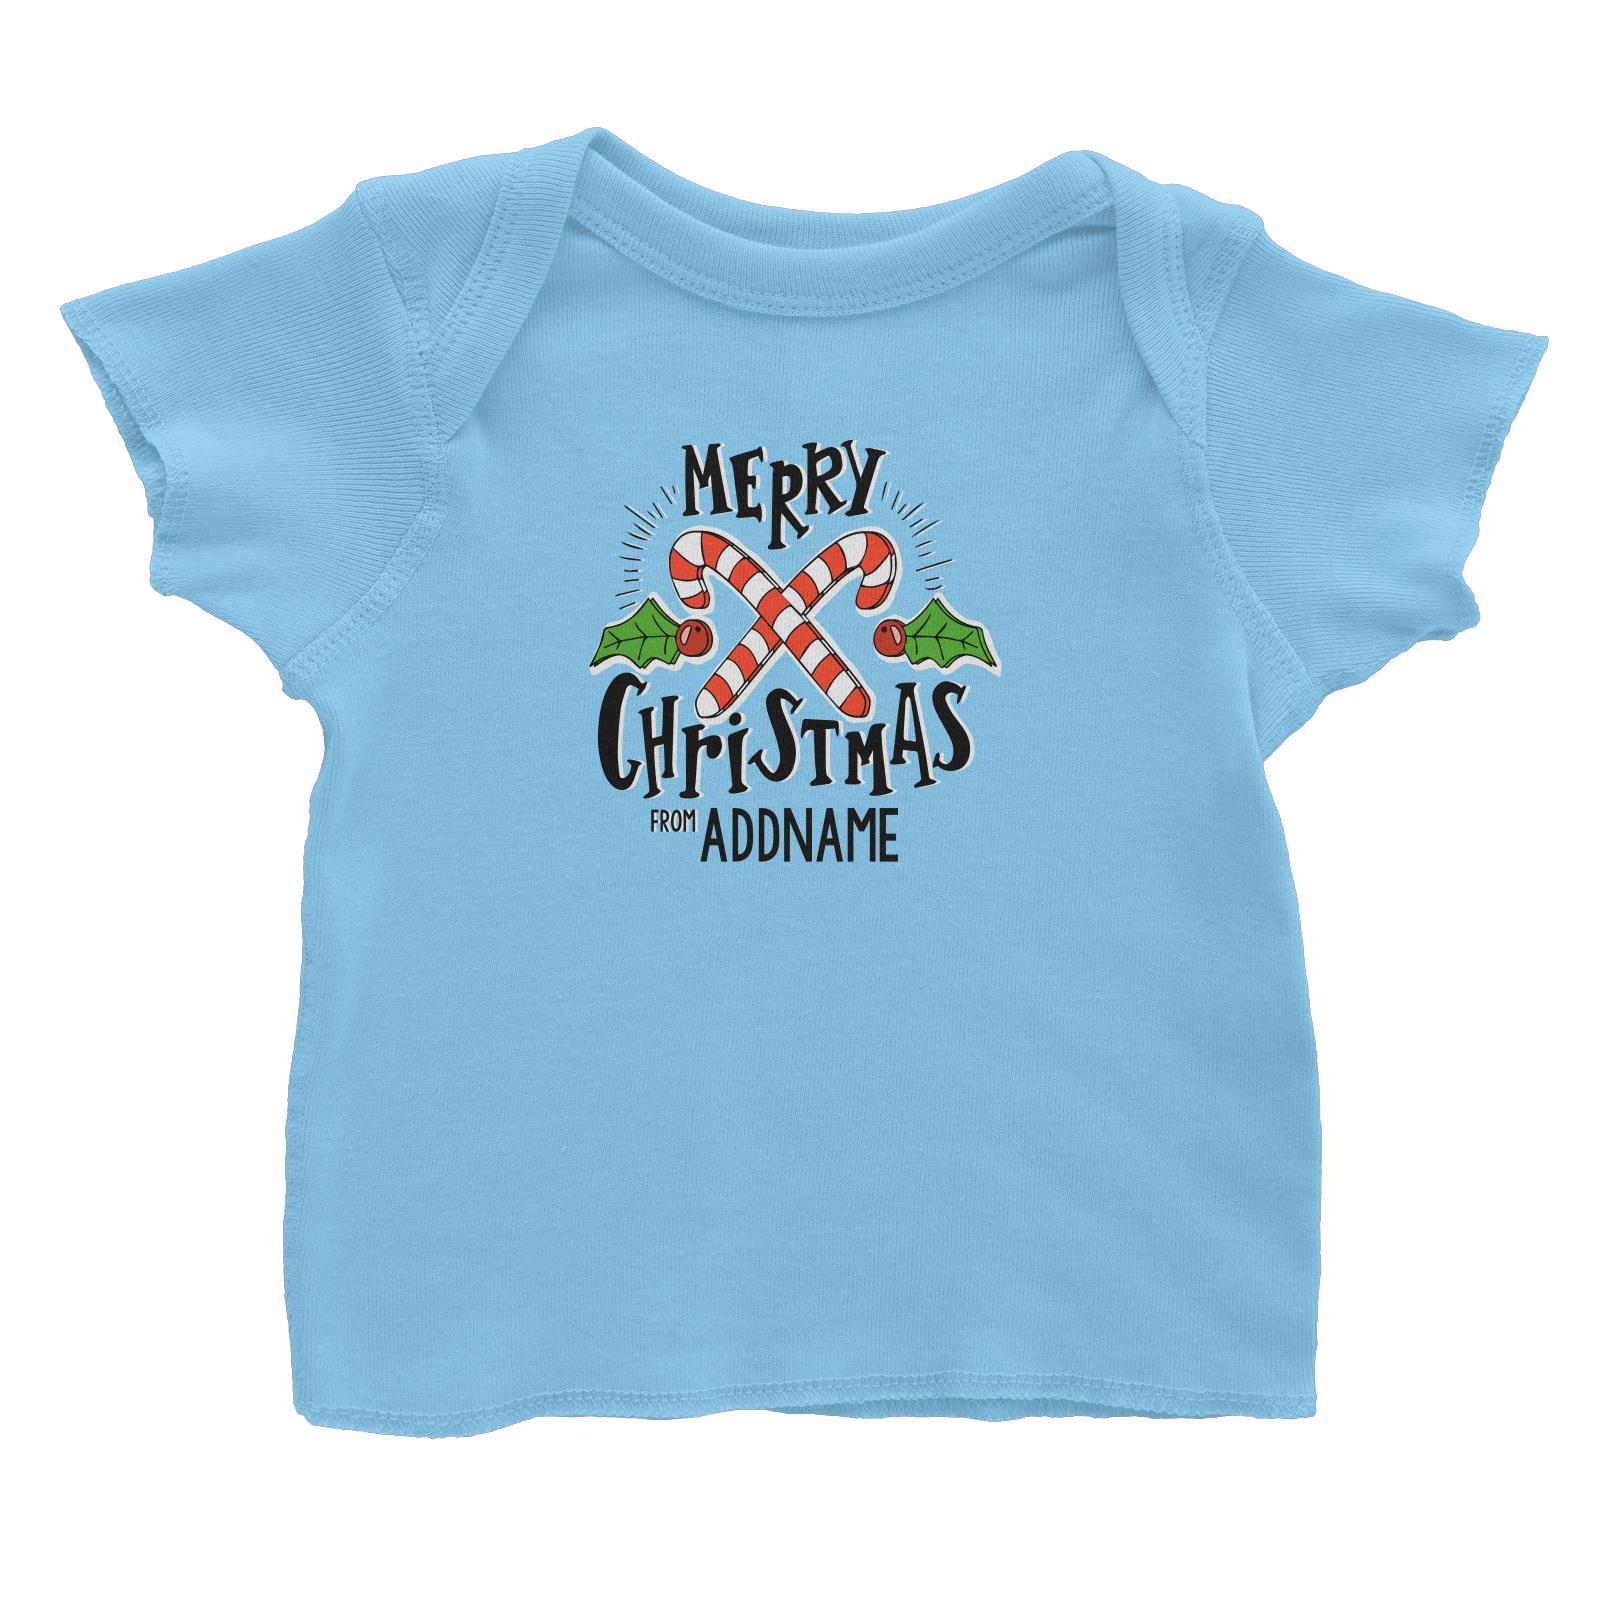 Merry Chrismas with Holly and Candy Cane Greeting Addname Baby T-Shirt Christmas Matching Family Personalizable Designs Lettering